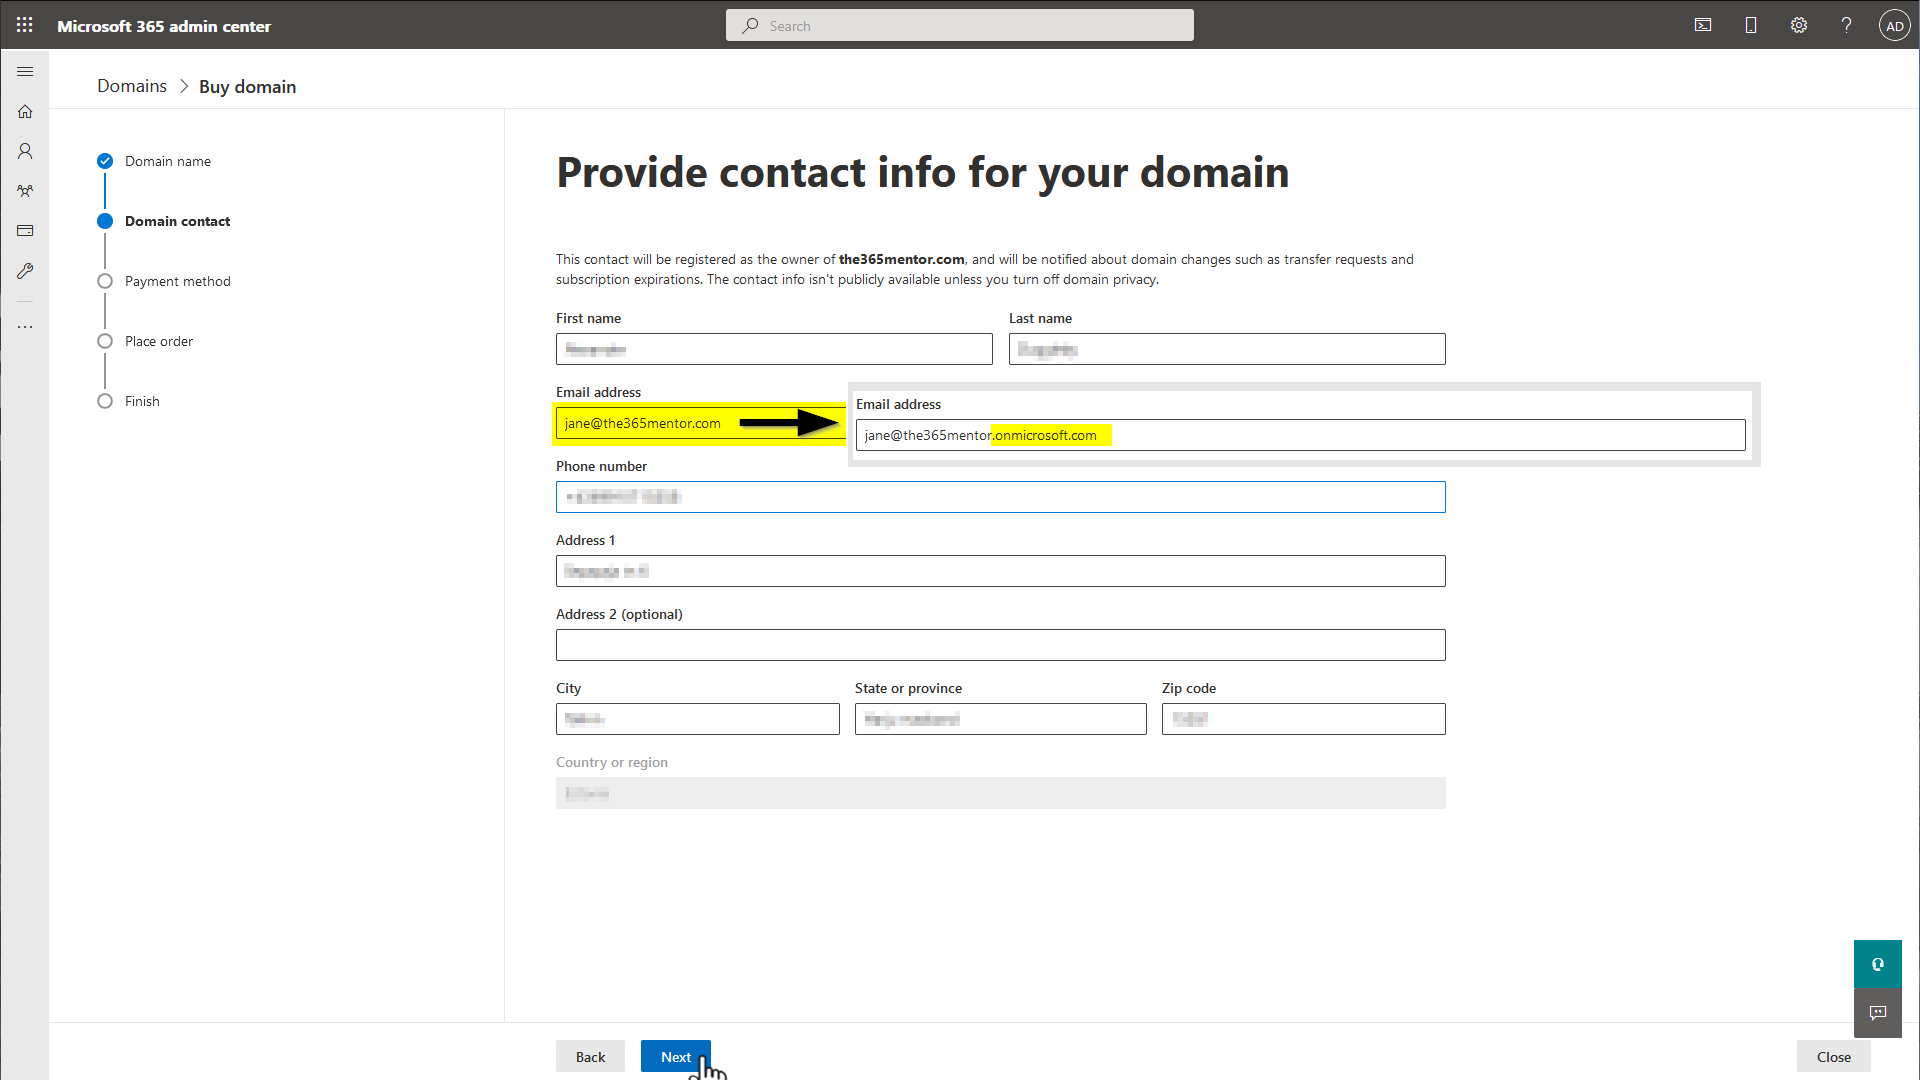 Buying a domain with Microsoft 365 - Contact information